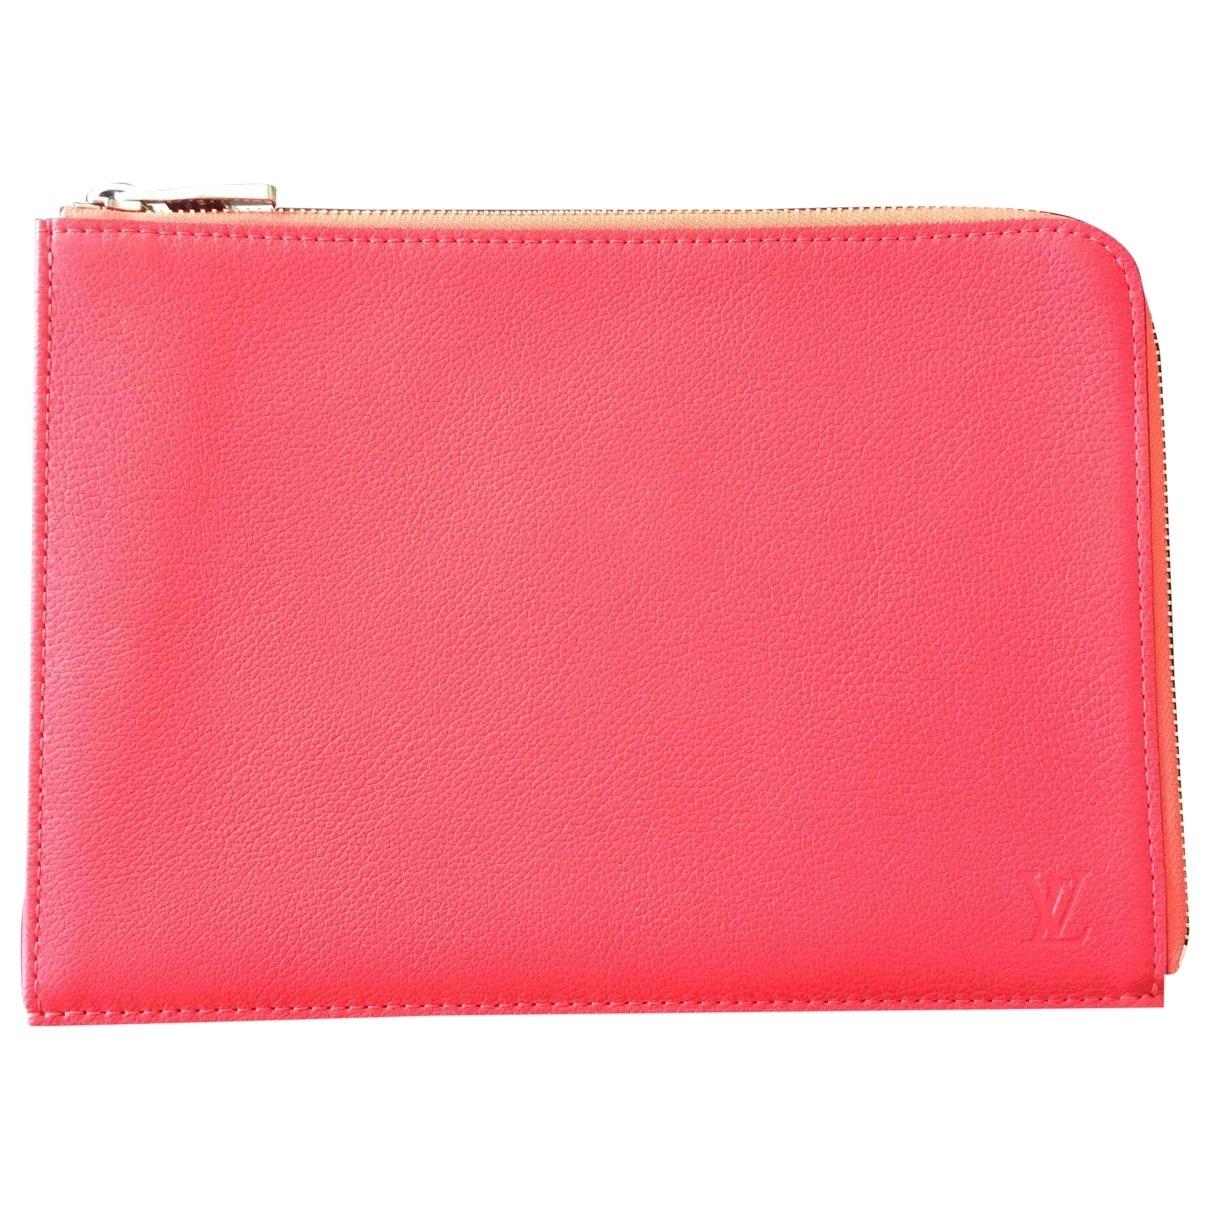 Louis Vuitton Leather Clutch Bag in Pink - Lyst